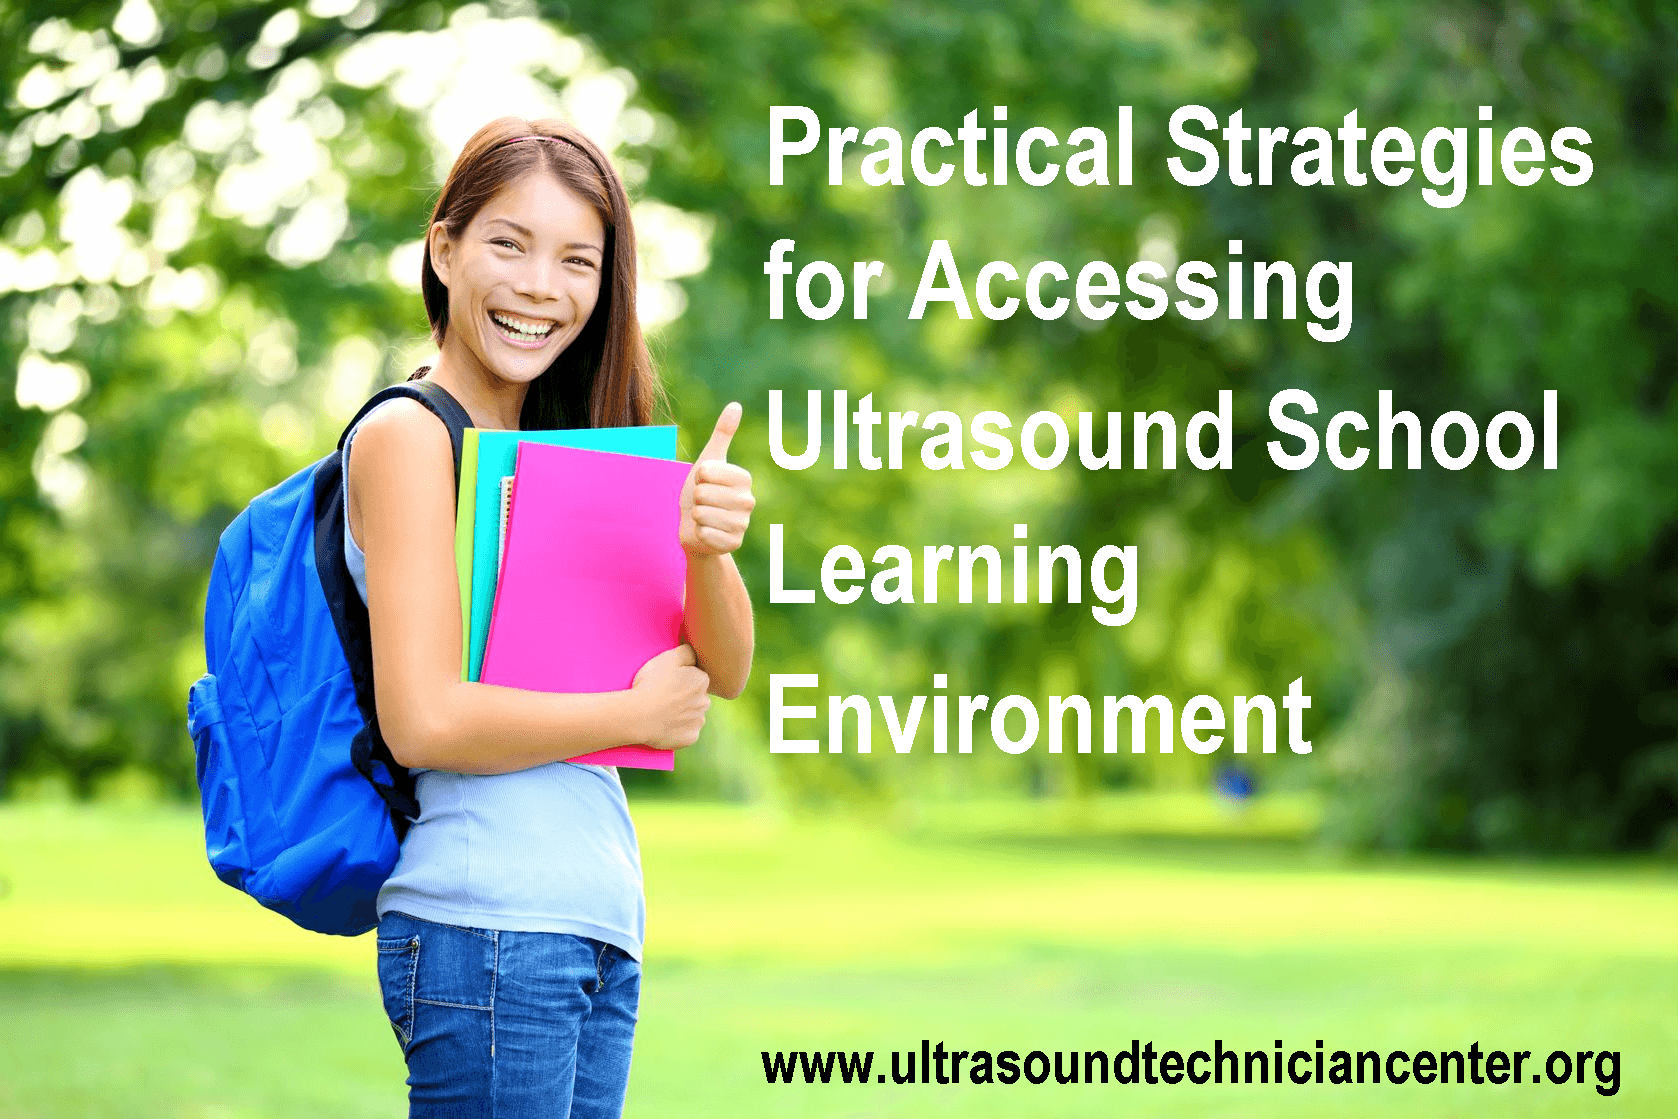 access ultrasound school learning environment